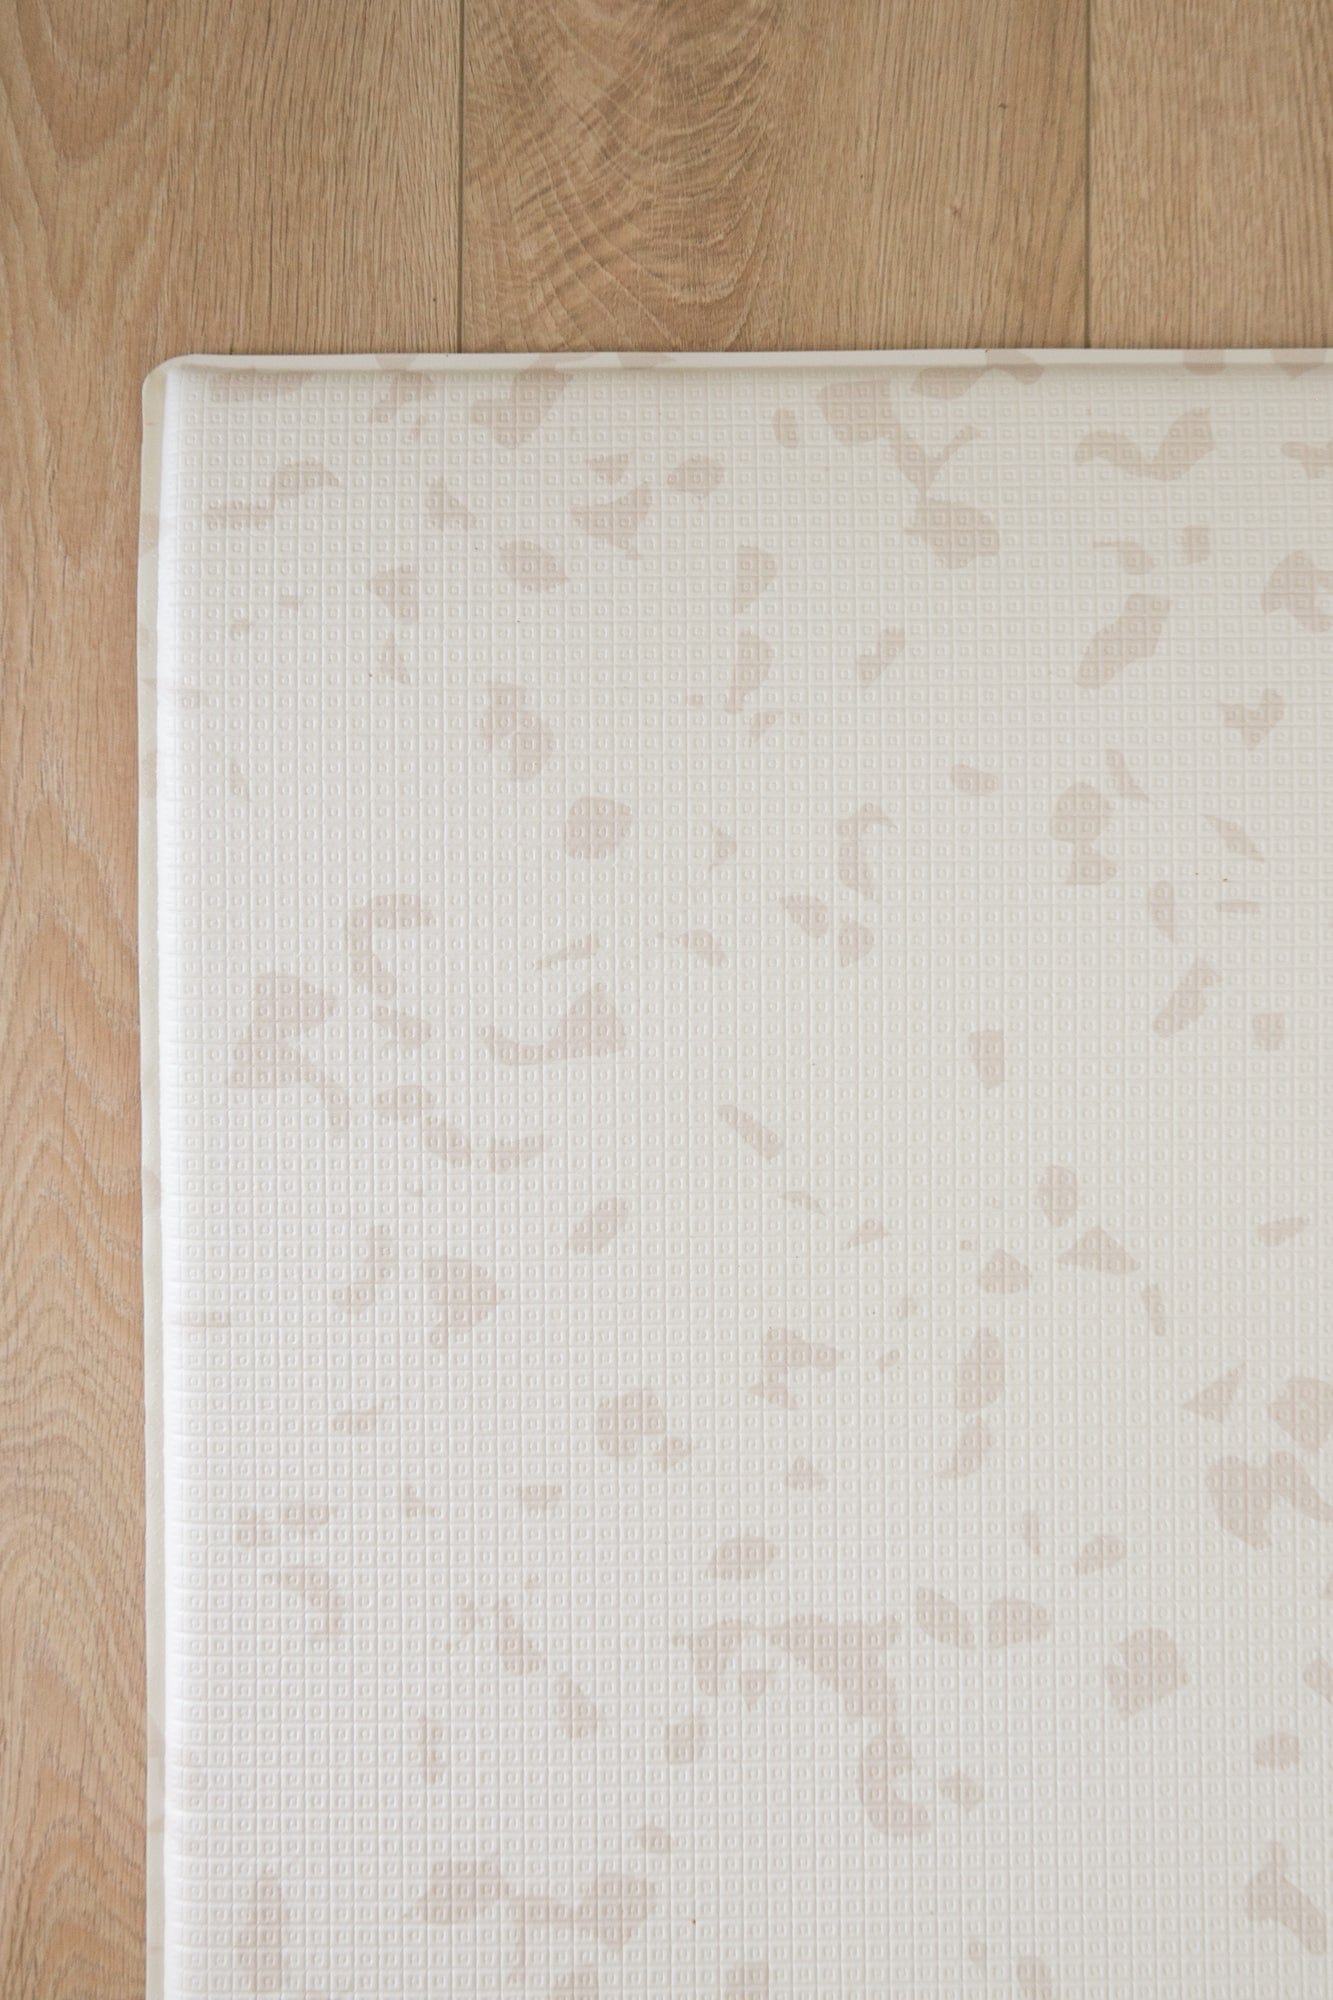 Padded Play Mat - Taupe Squares & Terrazzo